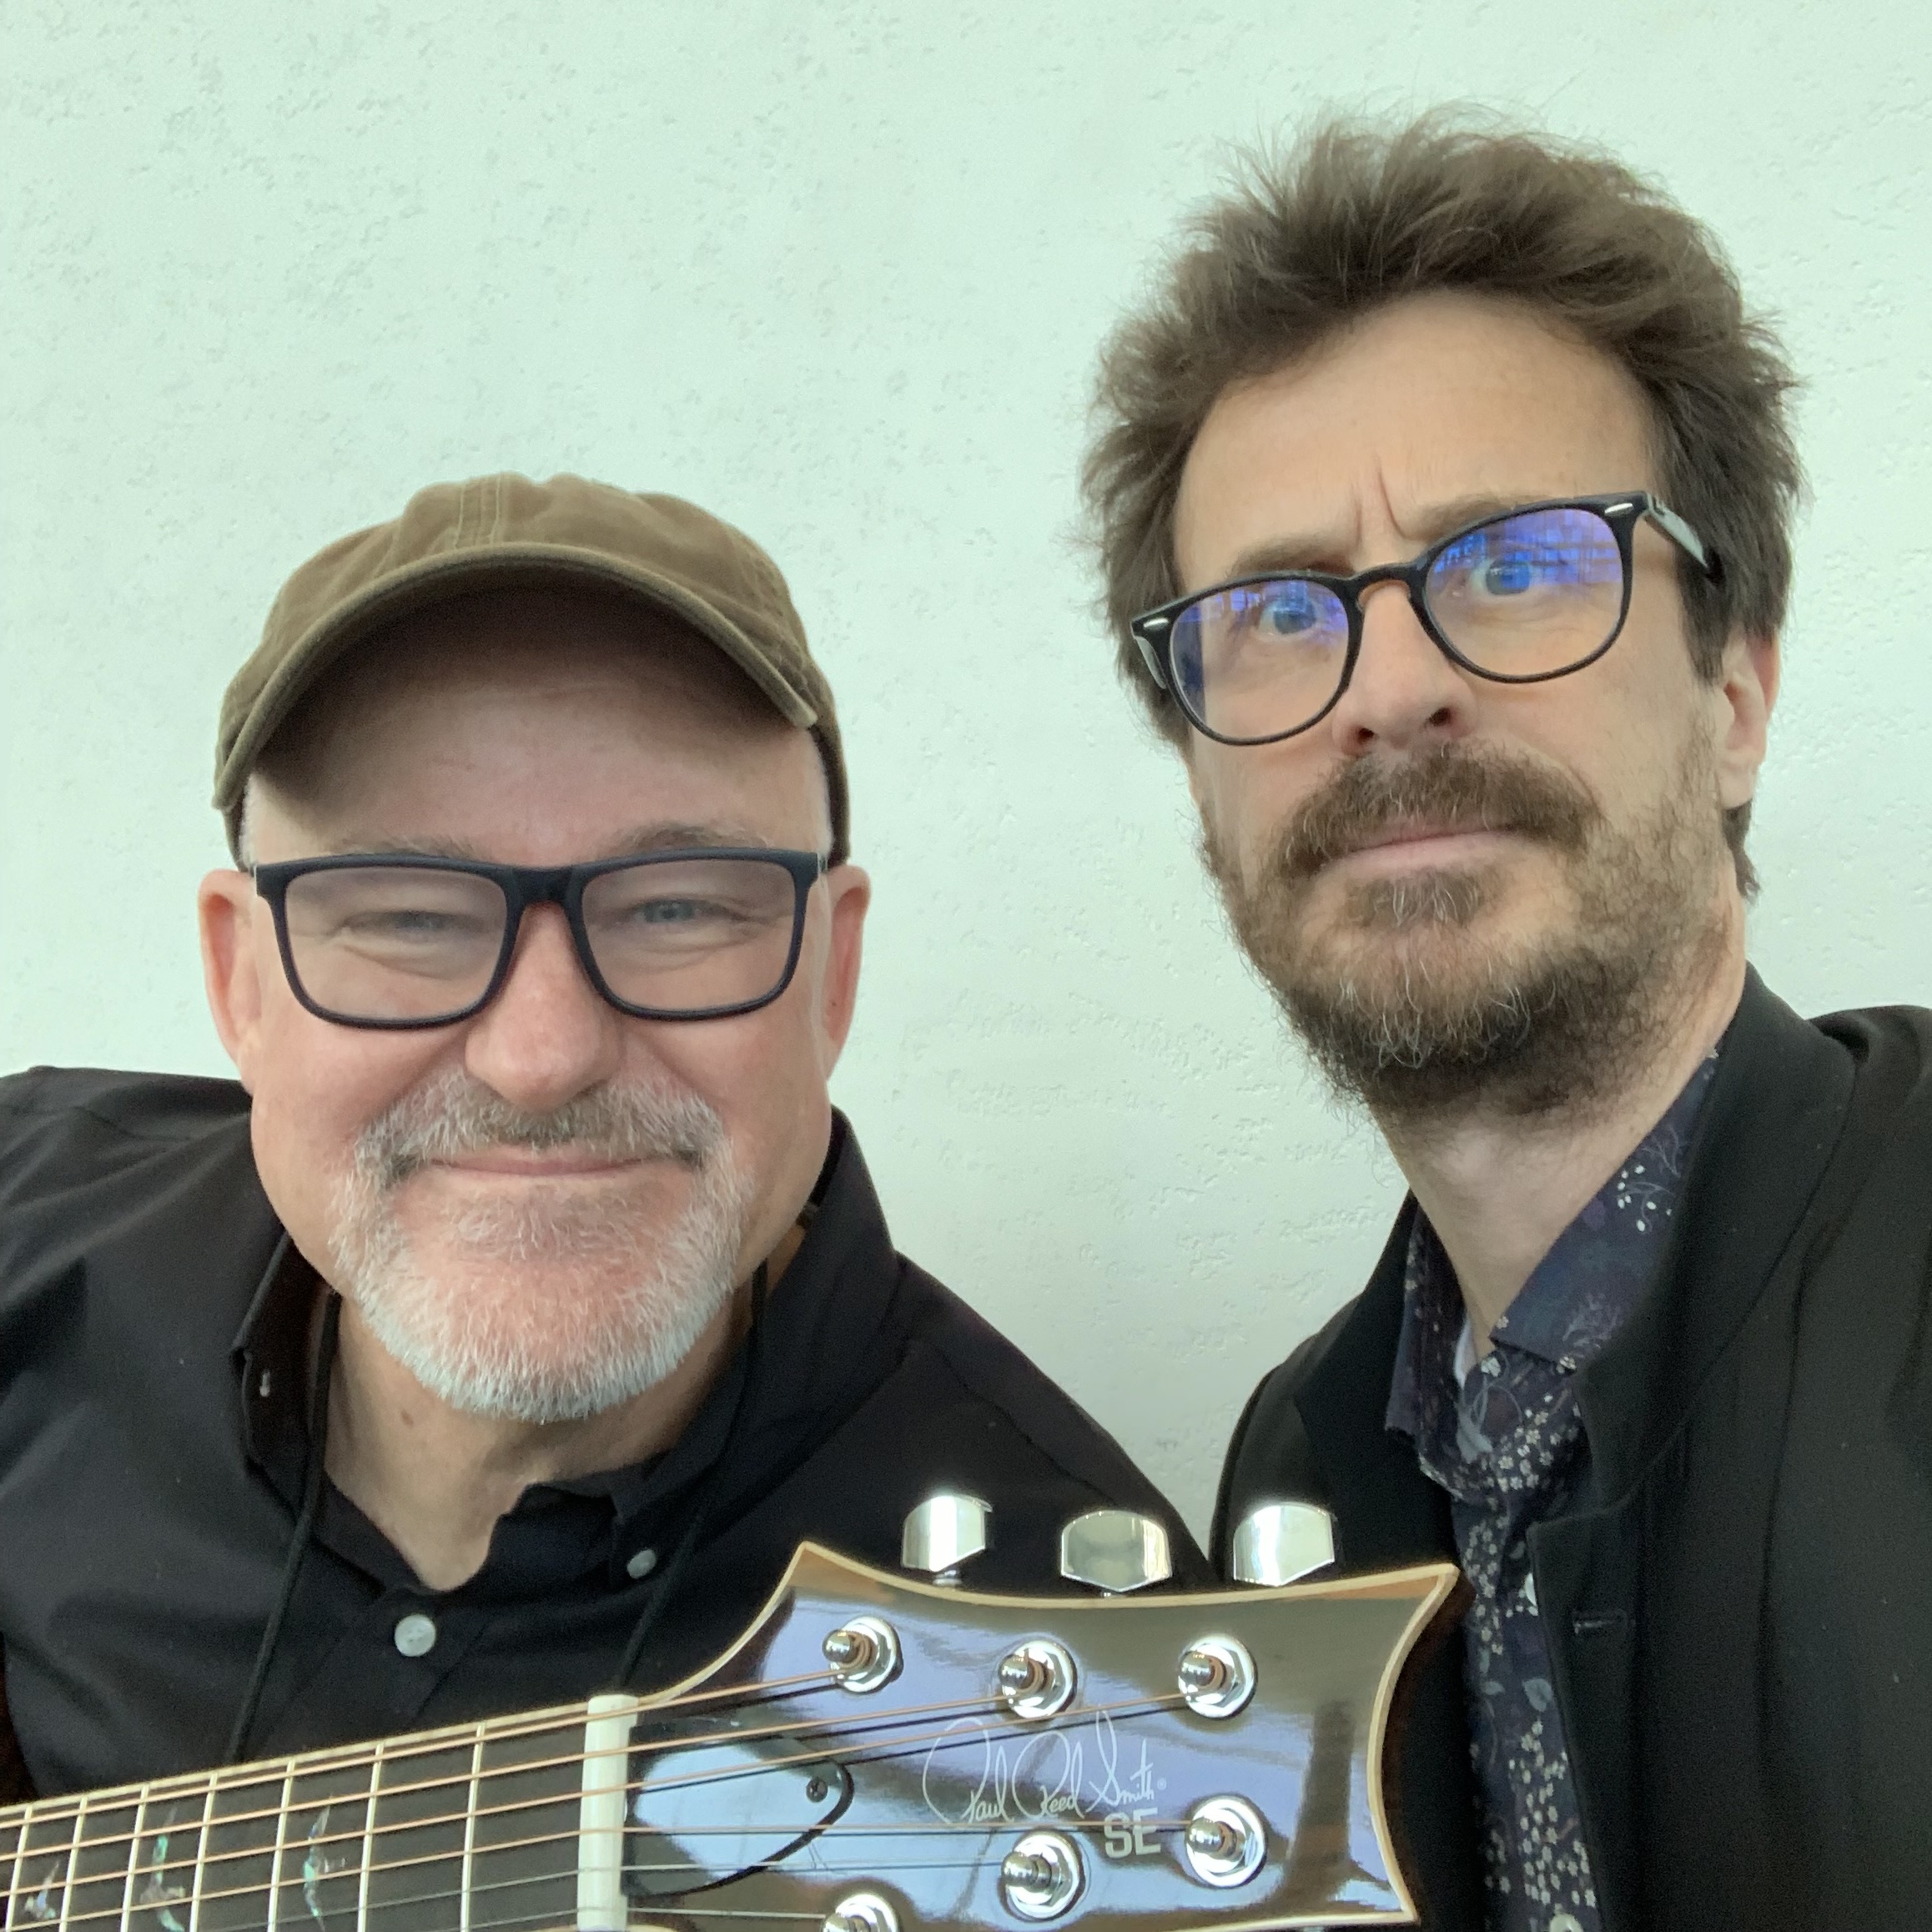 Tim Pierce interview - Session guitar player and youtuber - 2019 Winter NAMM